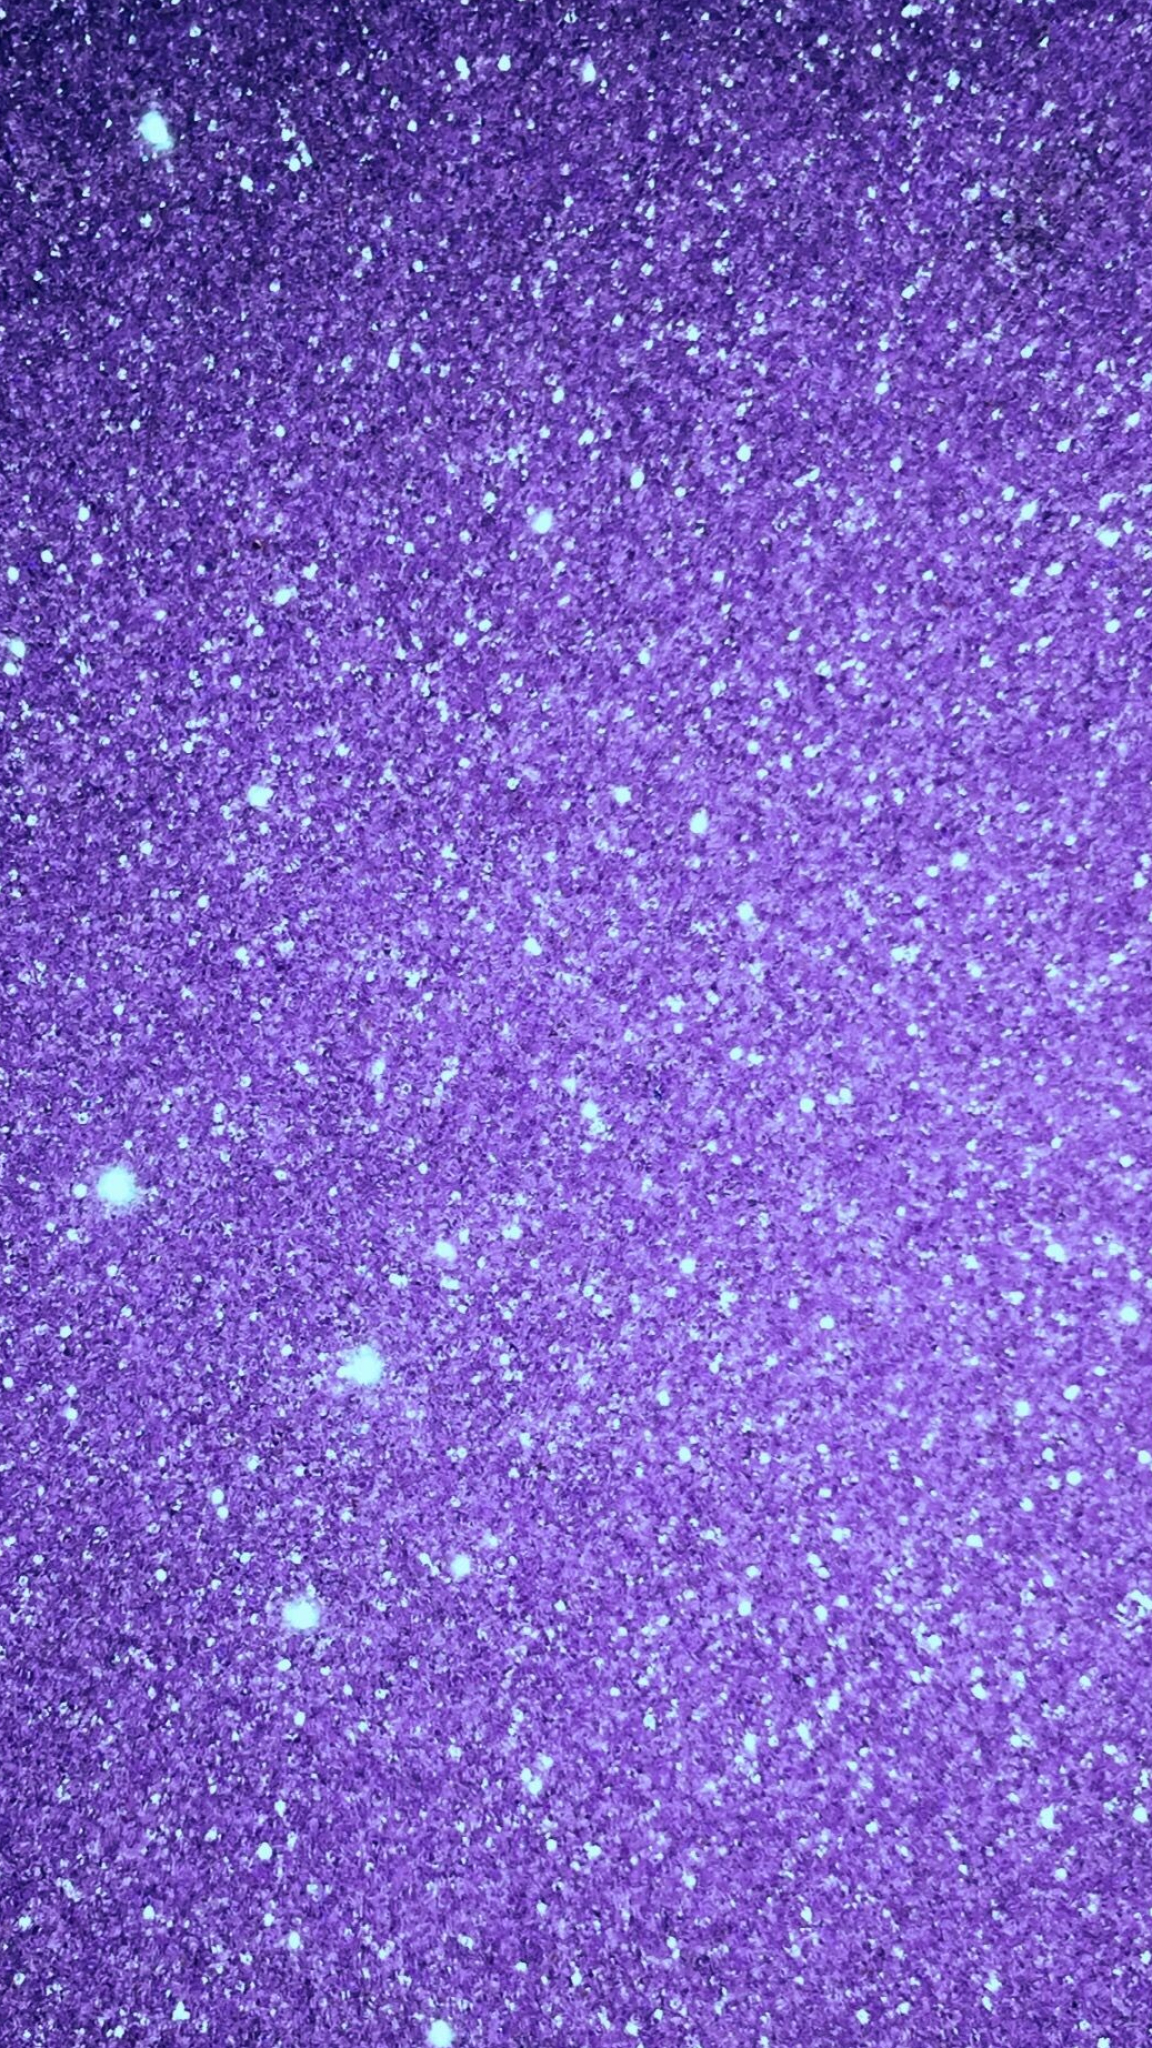 Sparkle: Purple, Used to make shimmering and shiny decorations for special events. 1160x2050 HD Wallpaper.